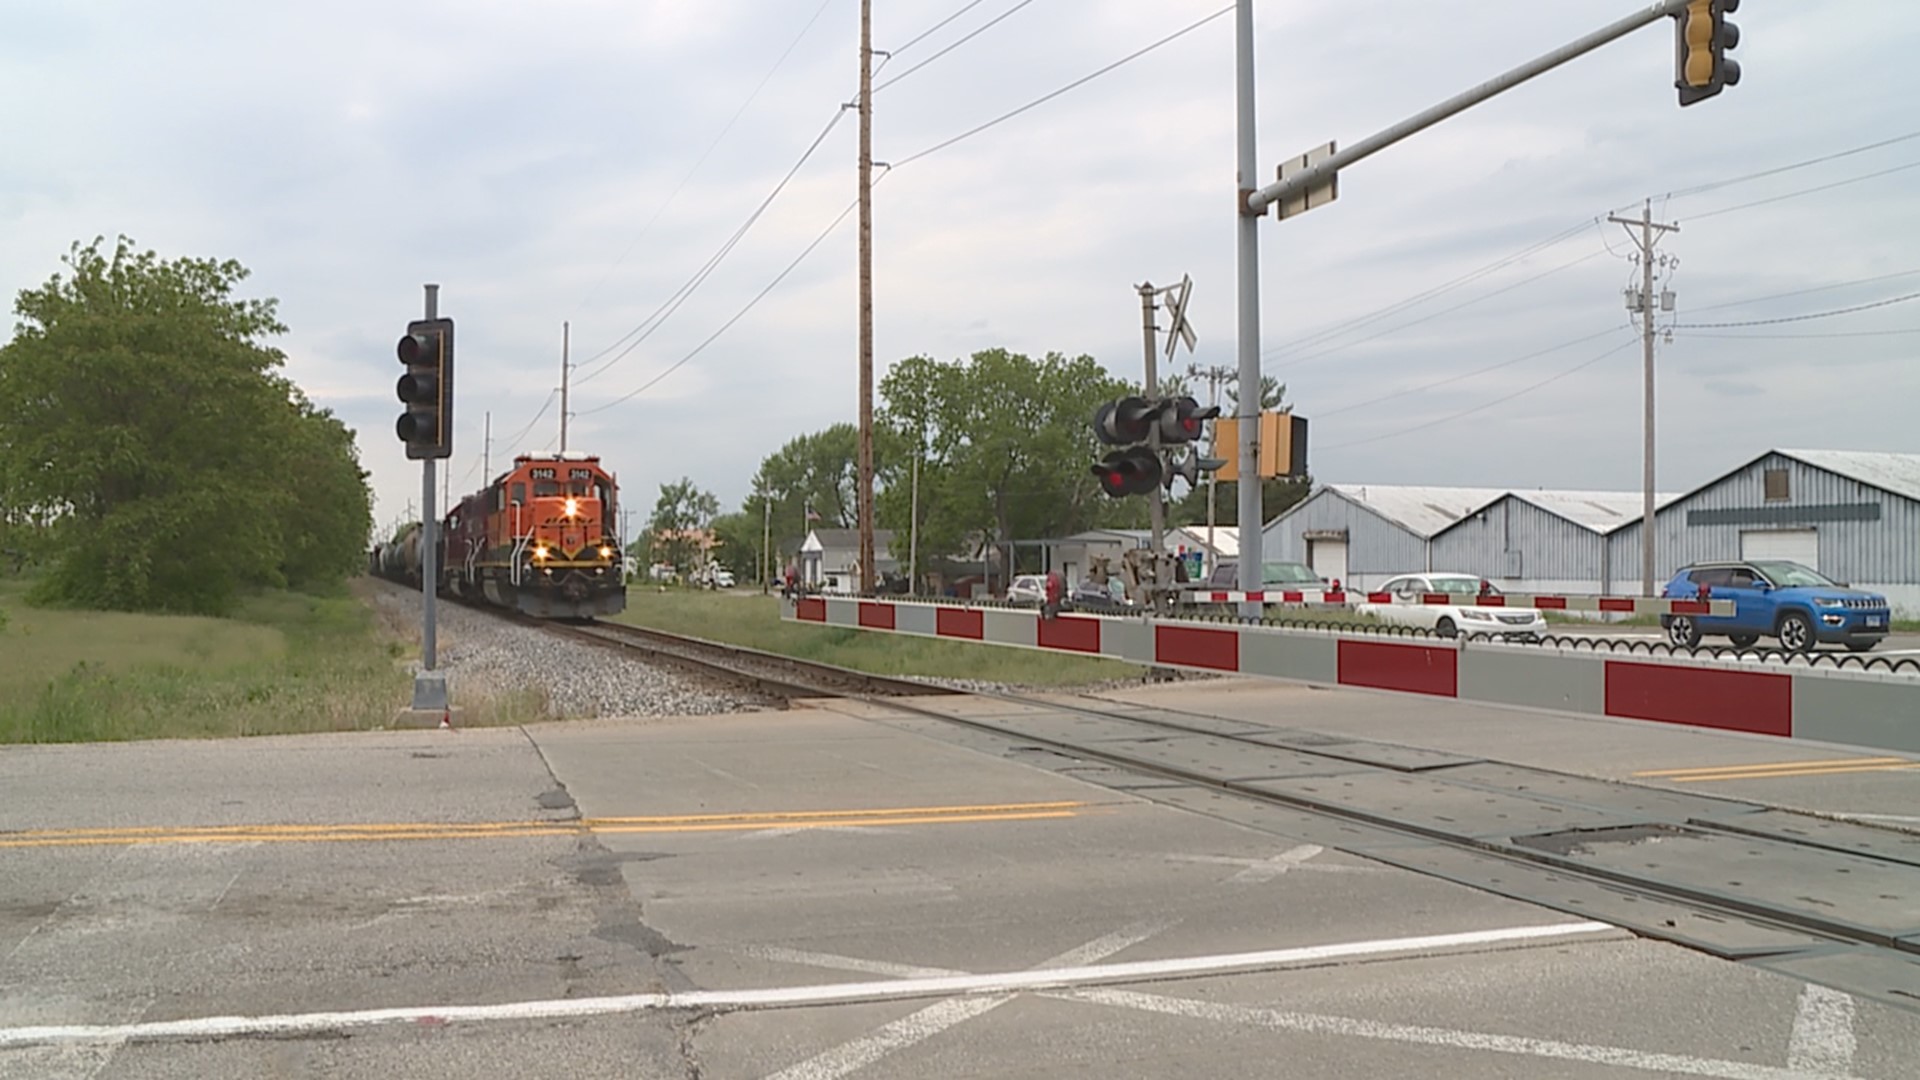 Moline City Council on Tuesday voted to hire an engineering firm to determine what changes would have to be made at 11 crossings in order to silence train whistles.